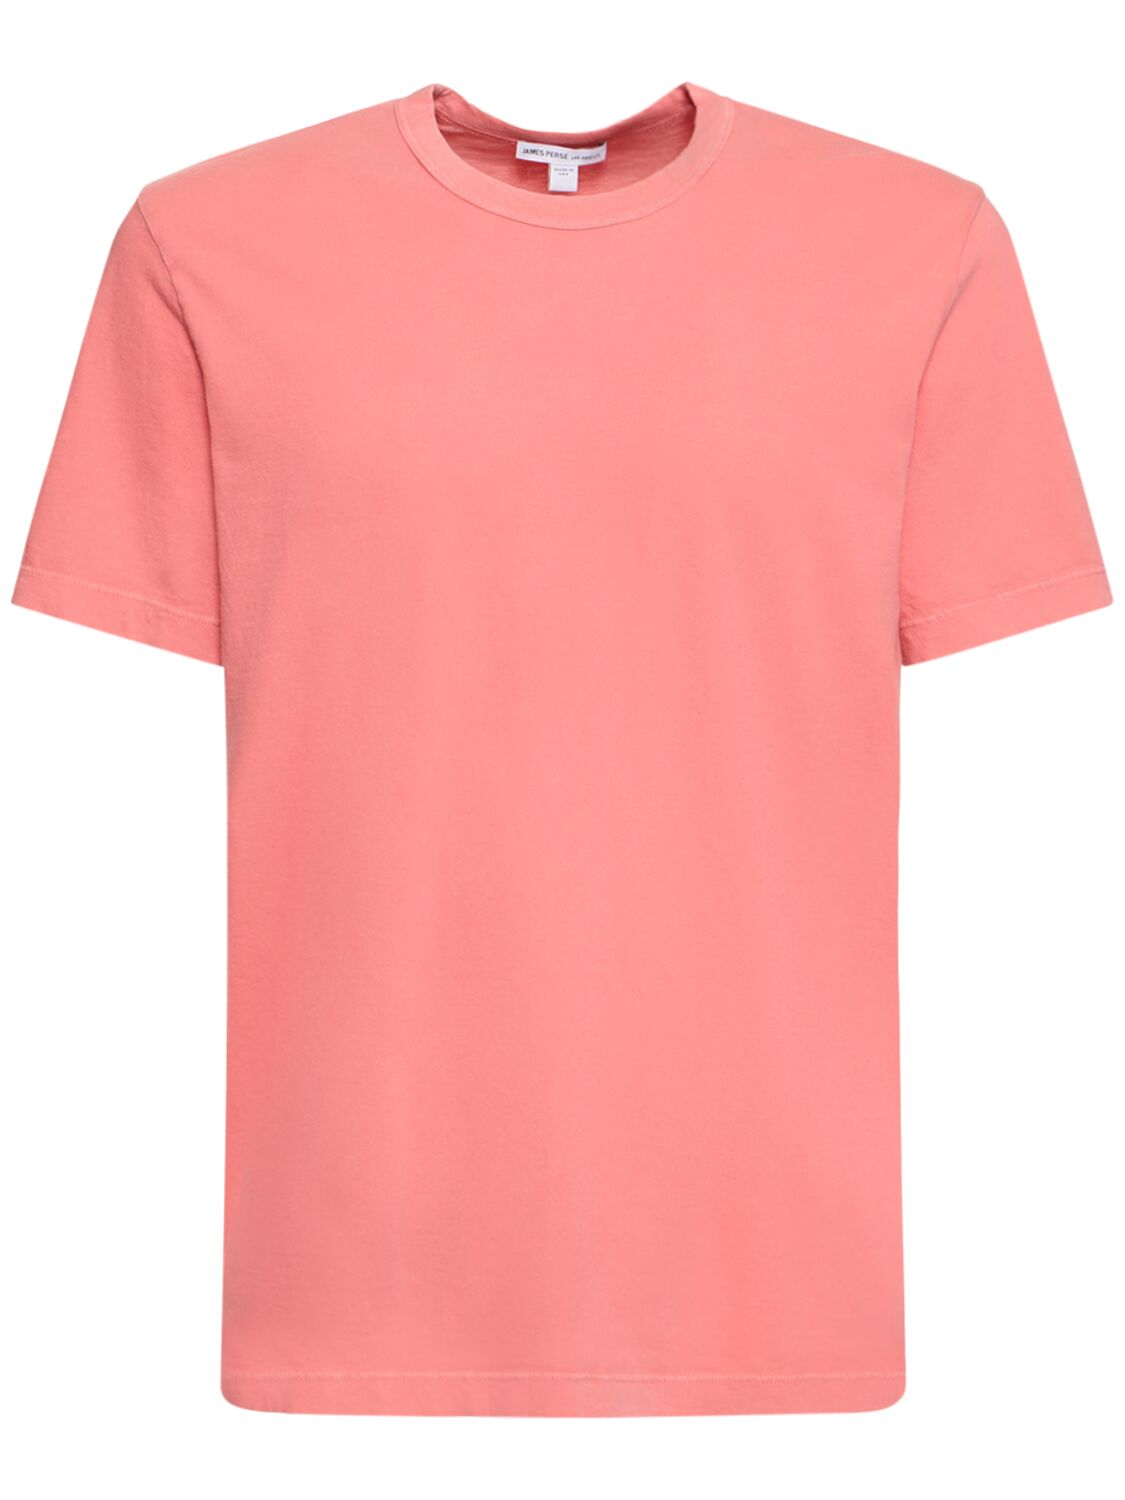 James Perse Lightweight Cotton Jersey T-shirt In Flamingo